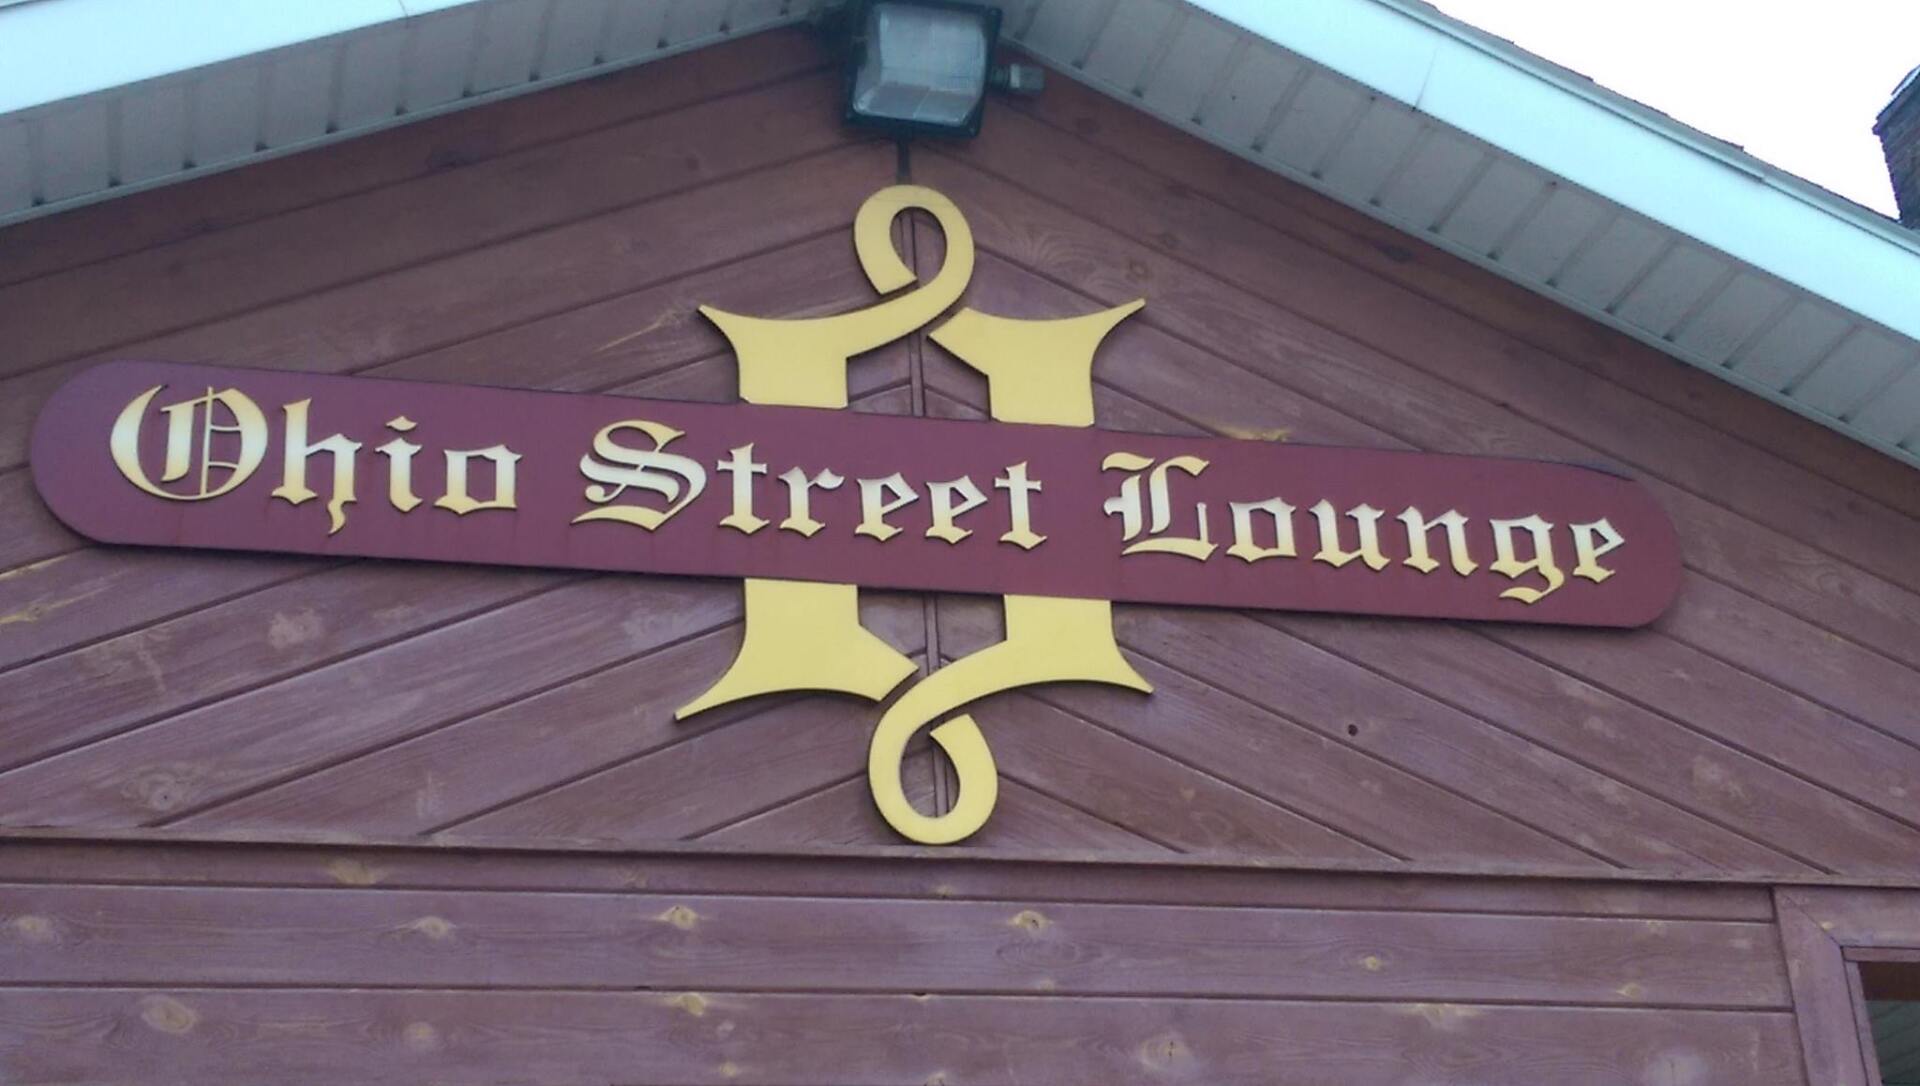 the ohio street lounge, Johnstown PA, featured business of the Lorain/Stonycreek hiking trails